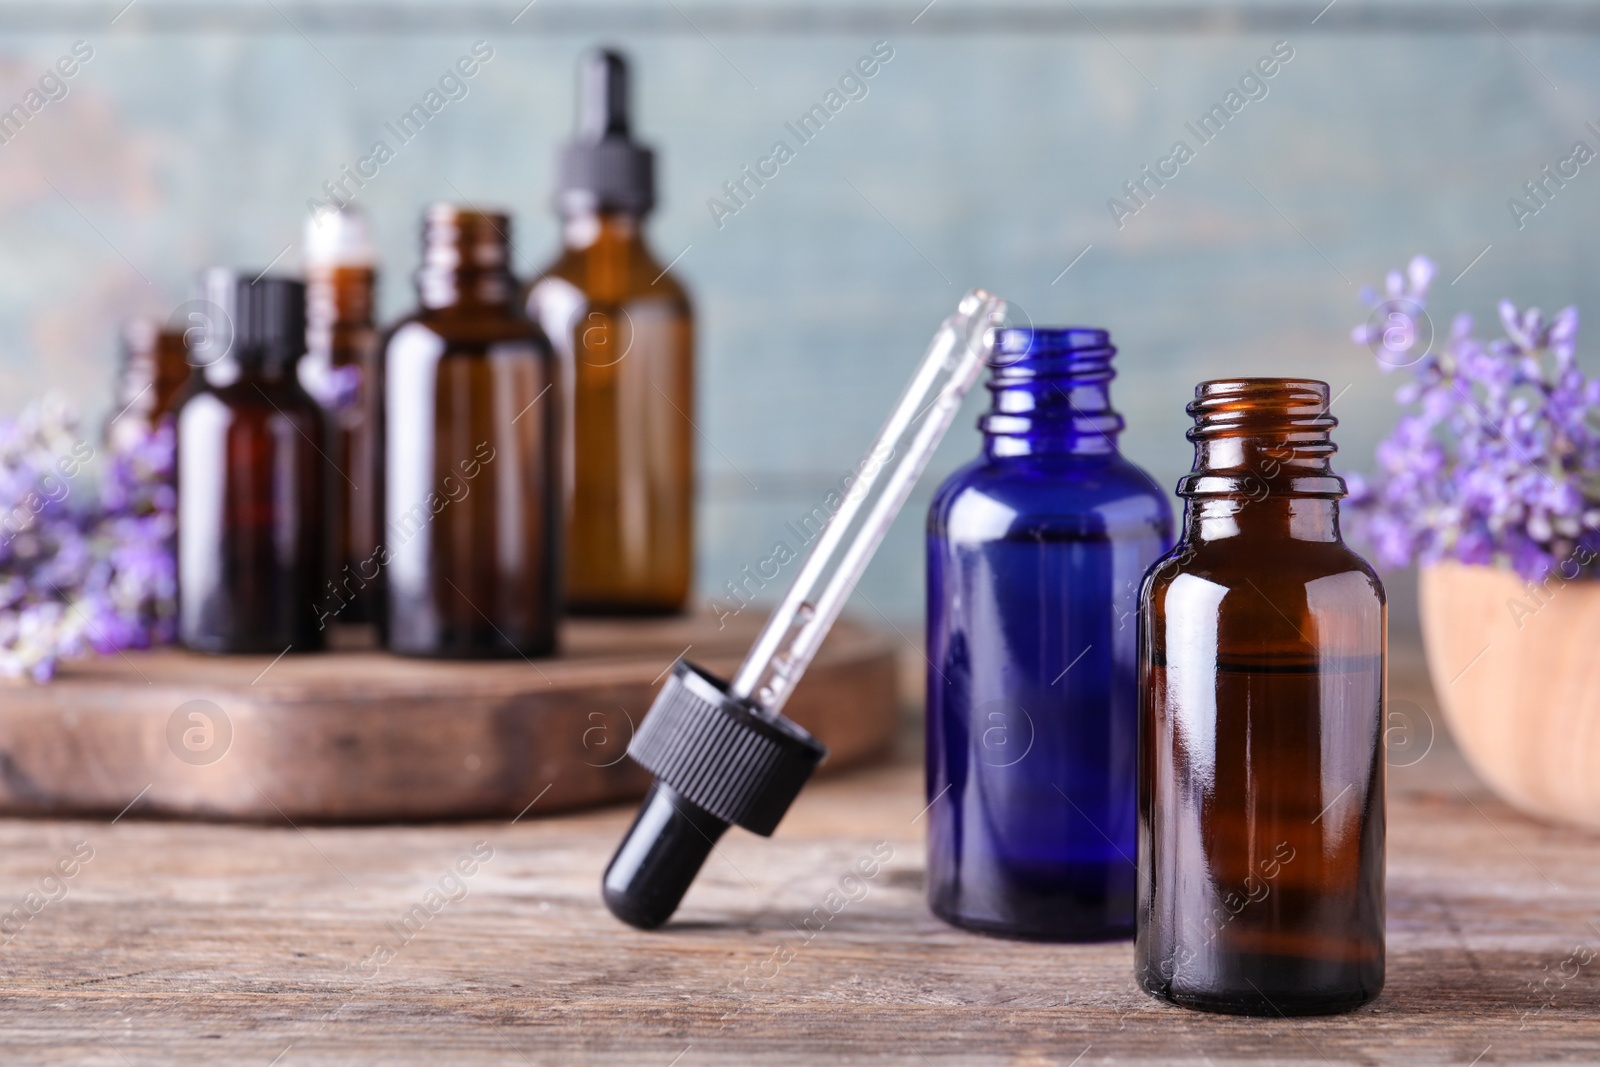 Photo of Bottles of lavender essential oil and flowers on wooden table against blue background